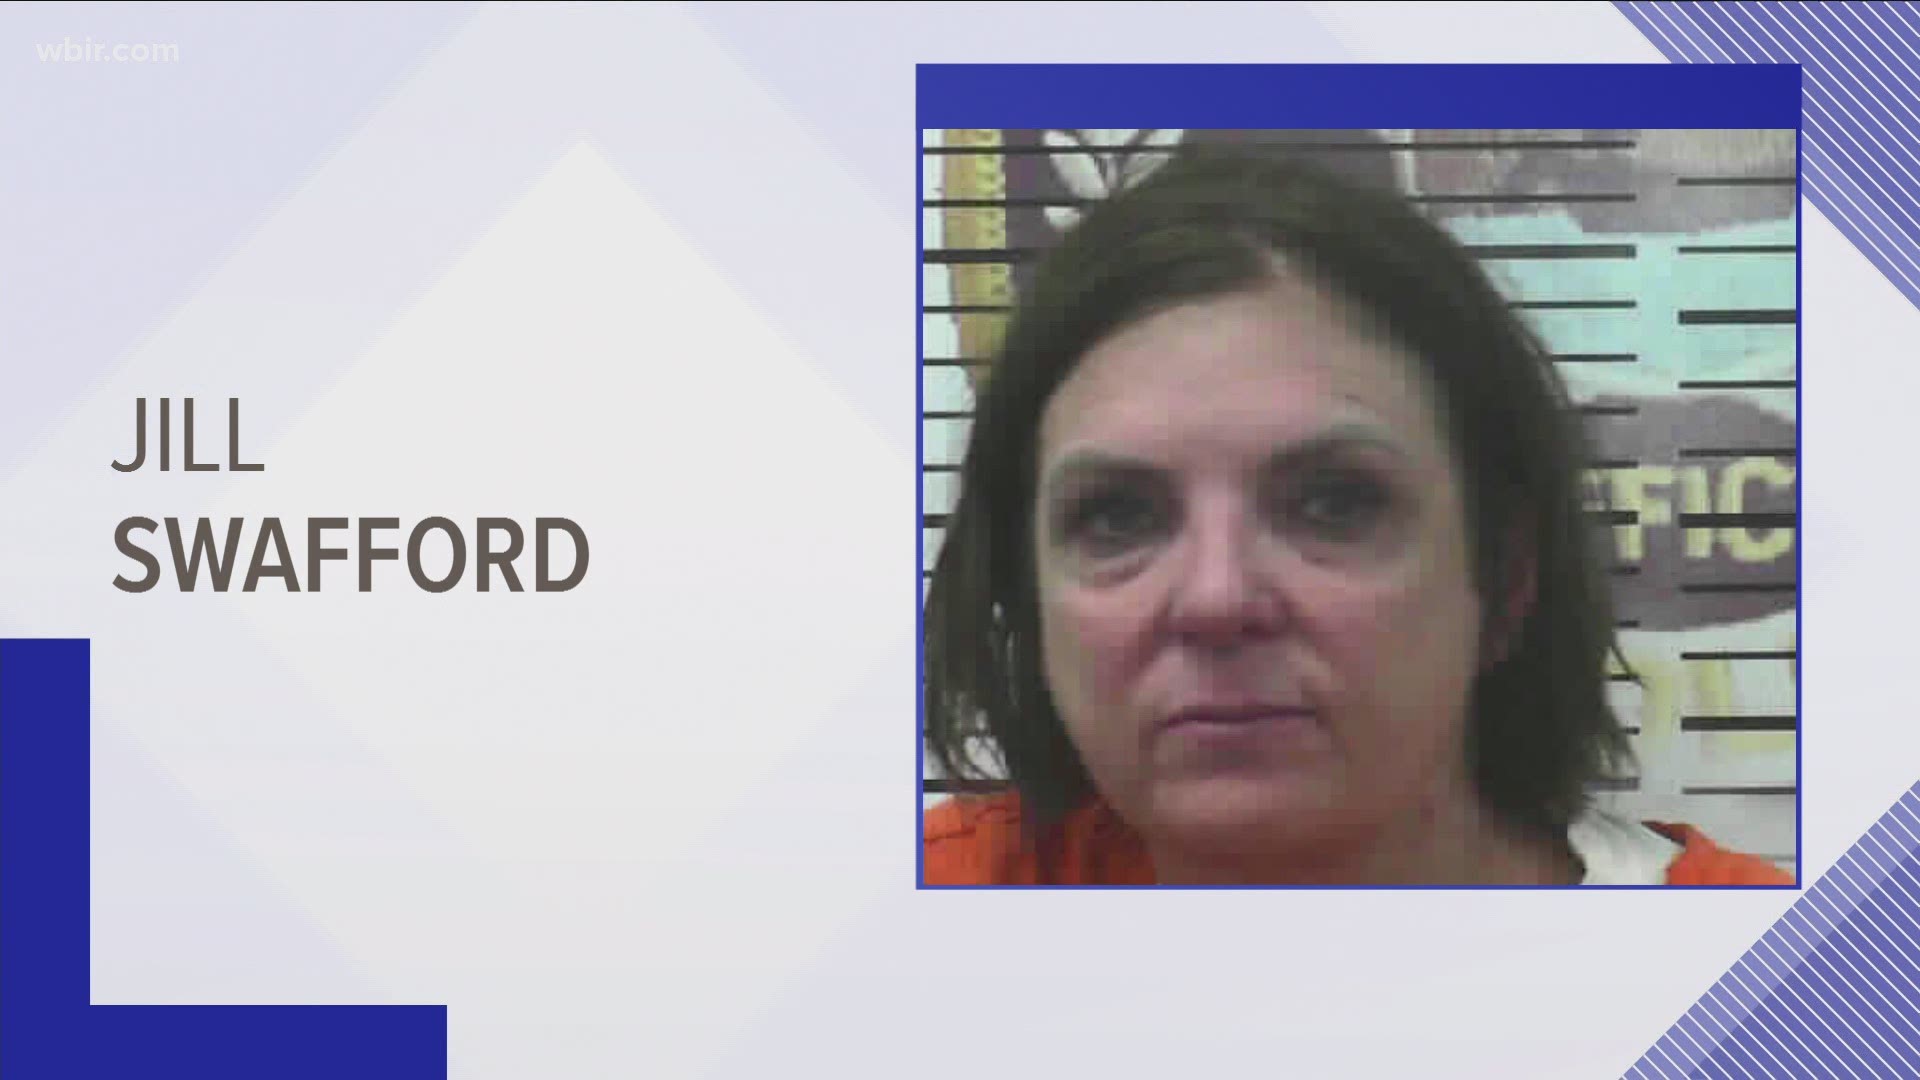 The principal of an Athens elementary school has pleaded guilty for boating under the influence, according to records.